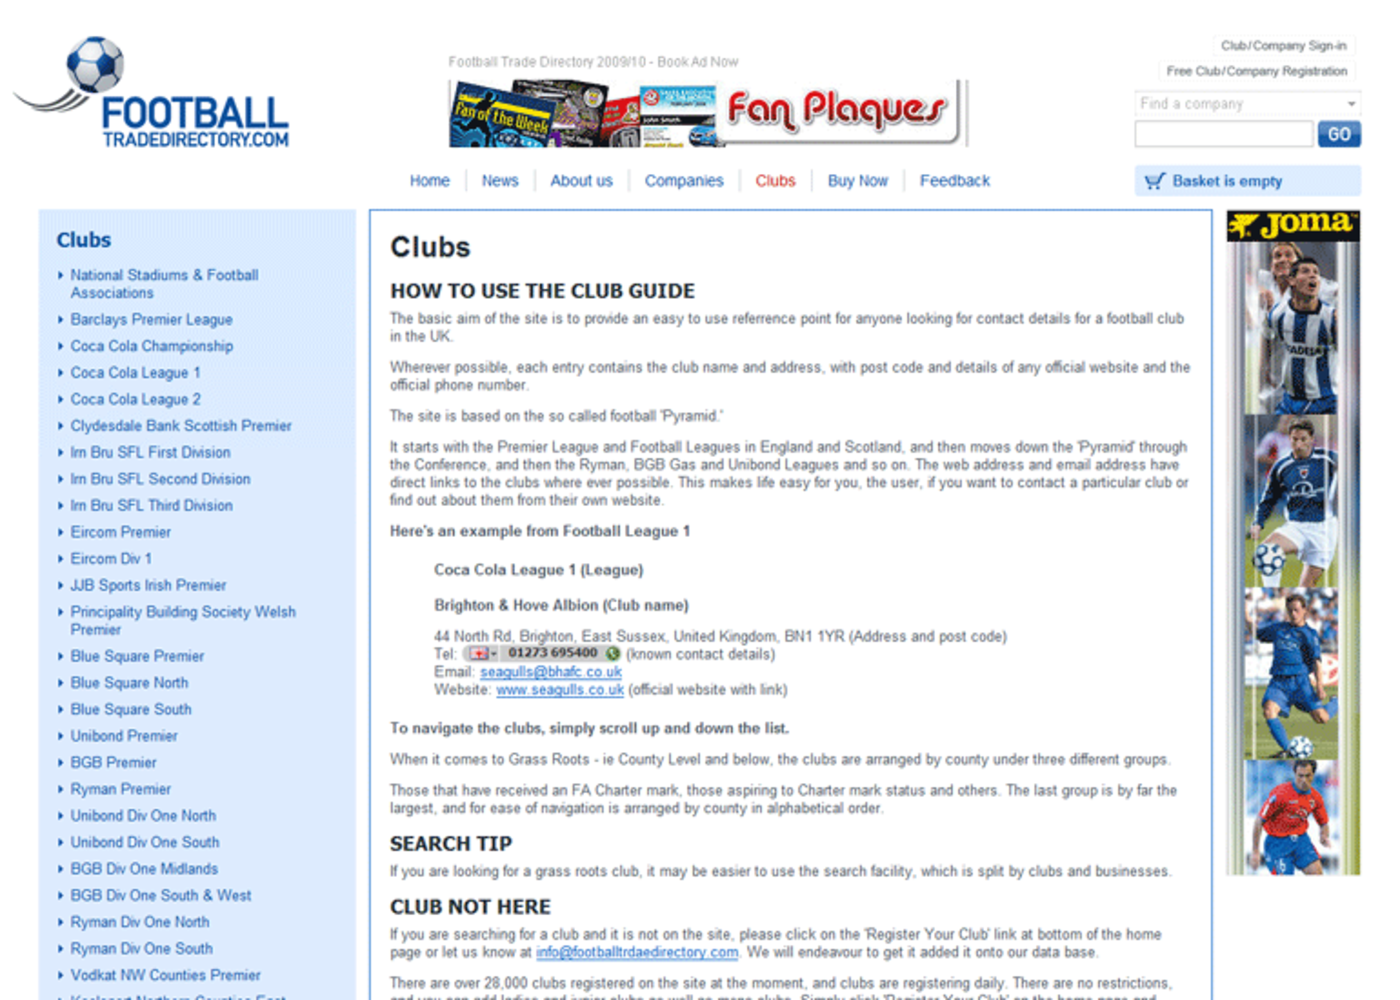 Football Trade Directory (2009) Clubs